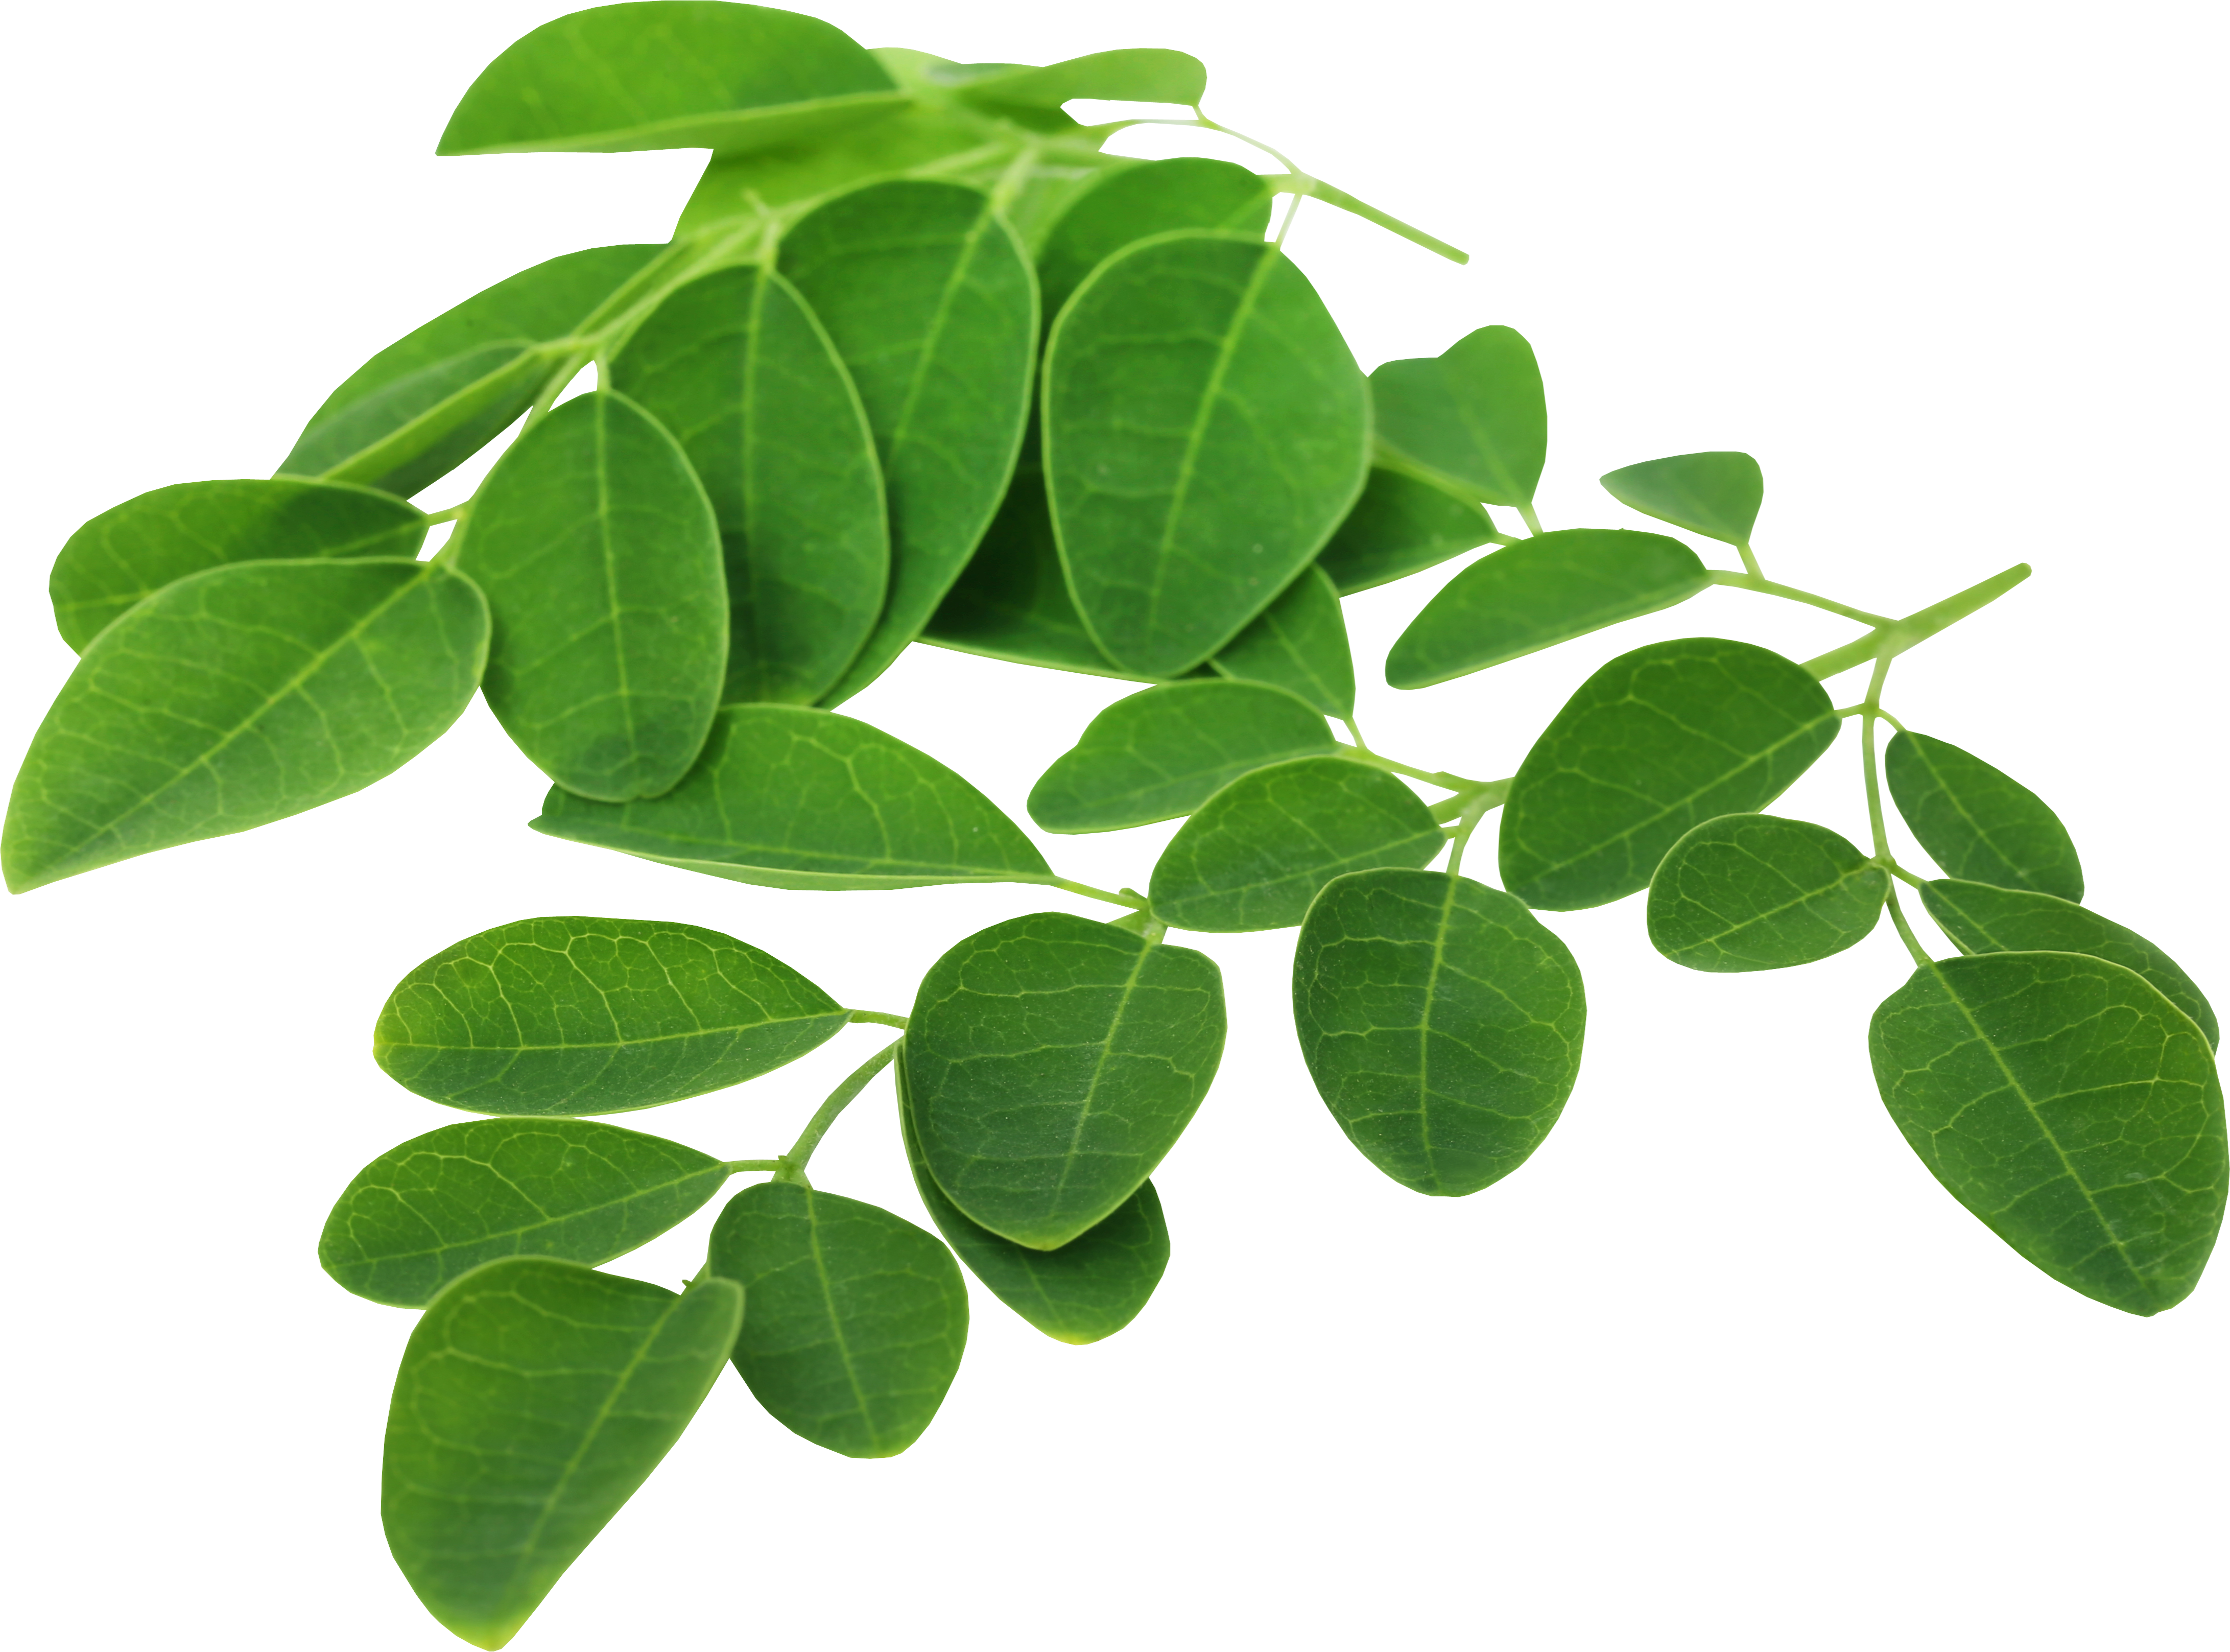 5 Benefits of Moringa, The Most Nutritious Plant on The Planet